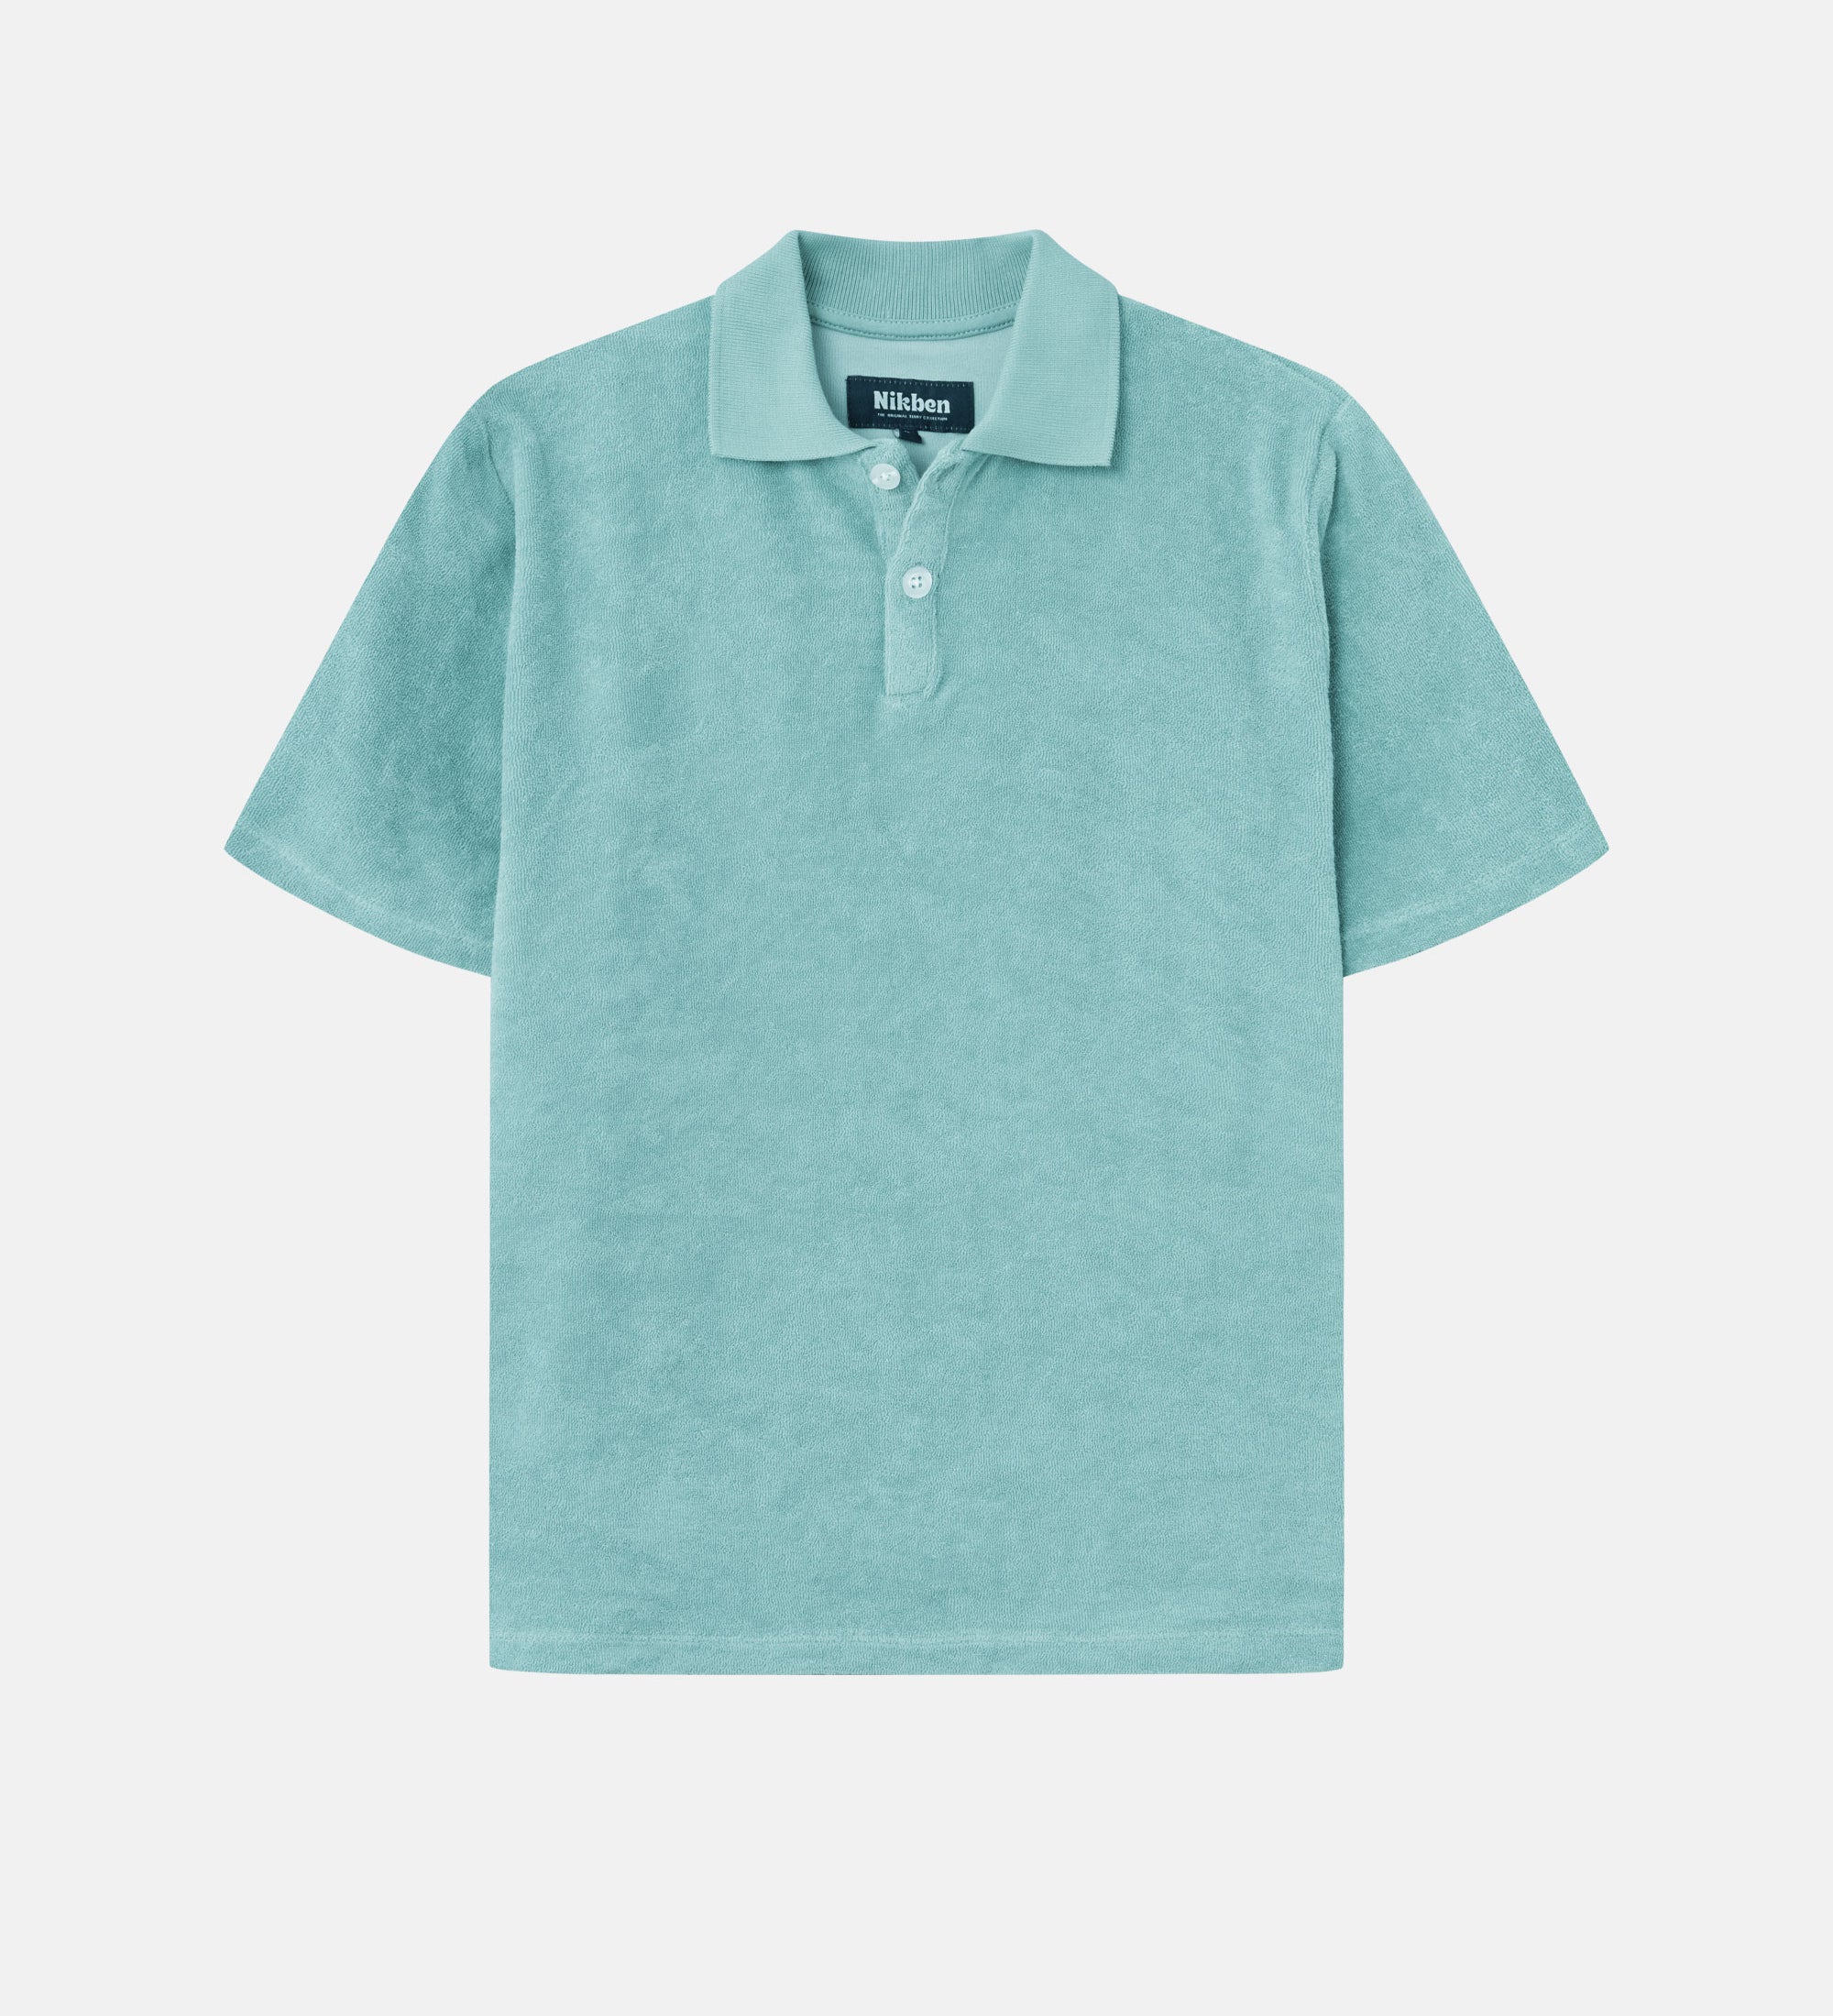 Grey-green short sleeve piké shirt for kids in terry toweling fabric.